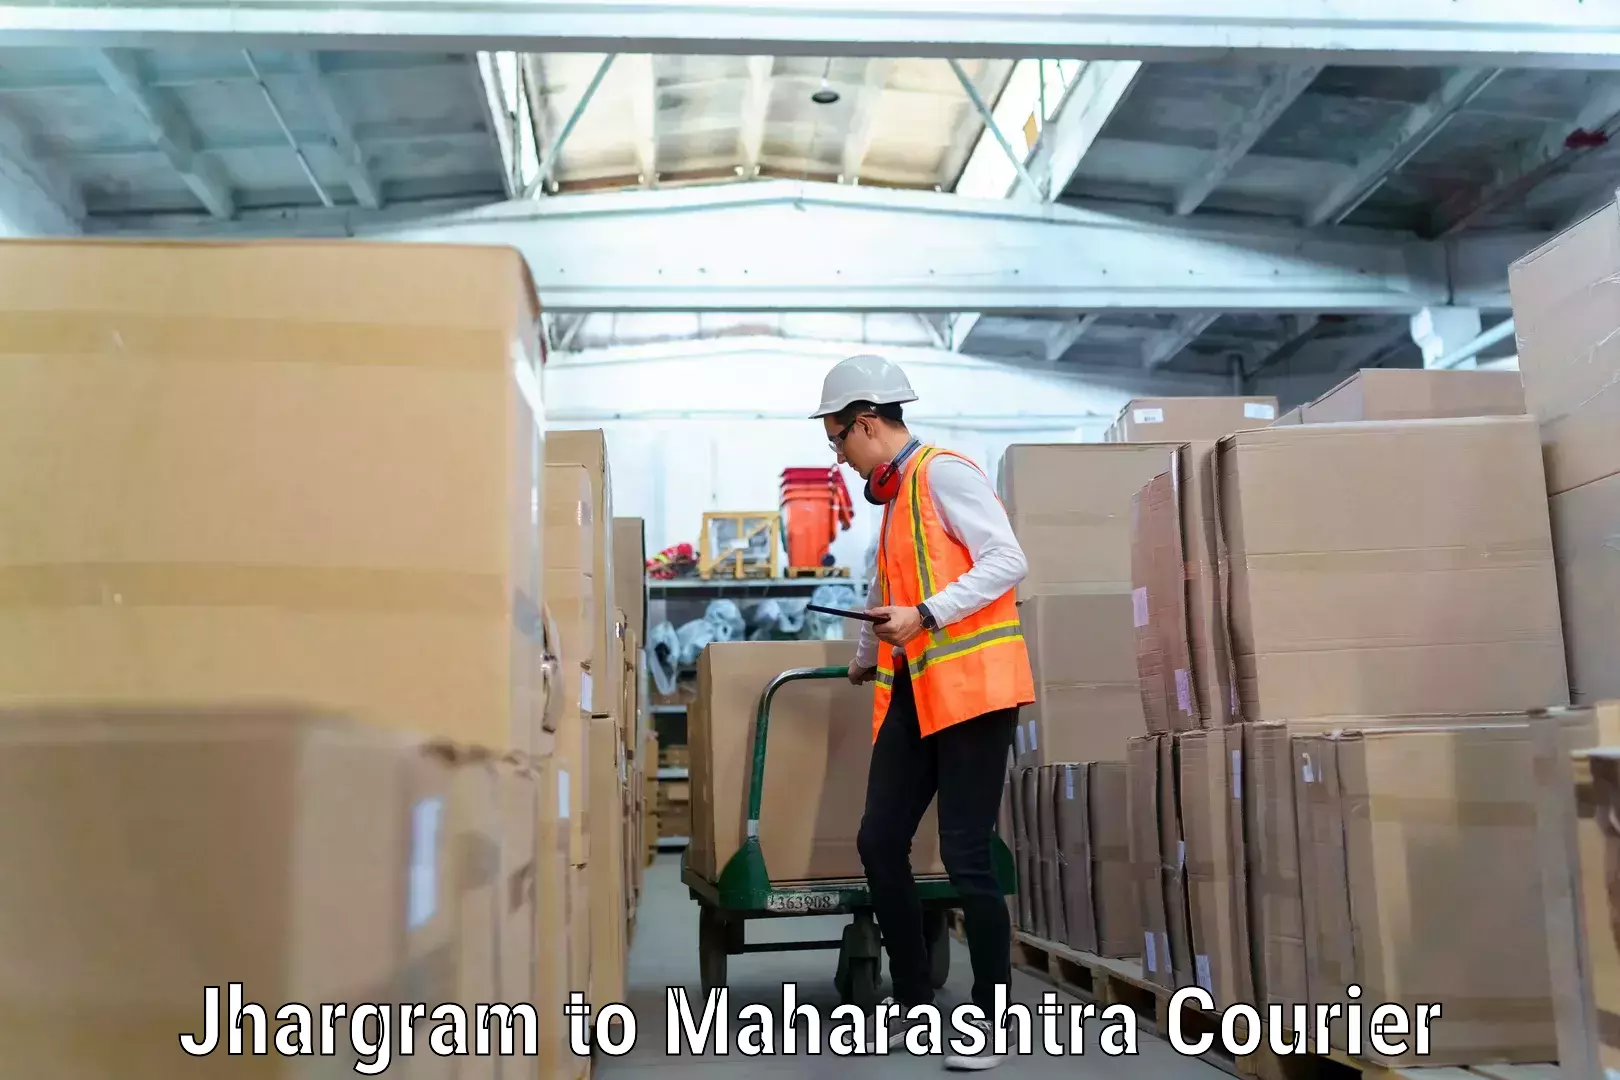 Reliable relocation services Jhargram to Maharashtra